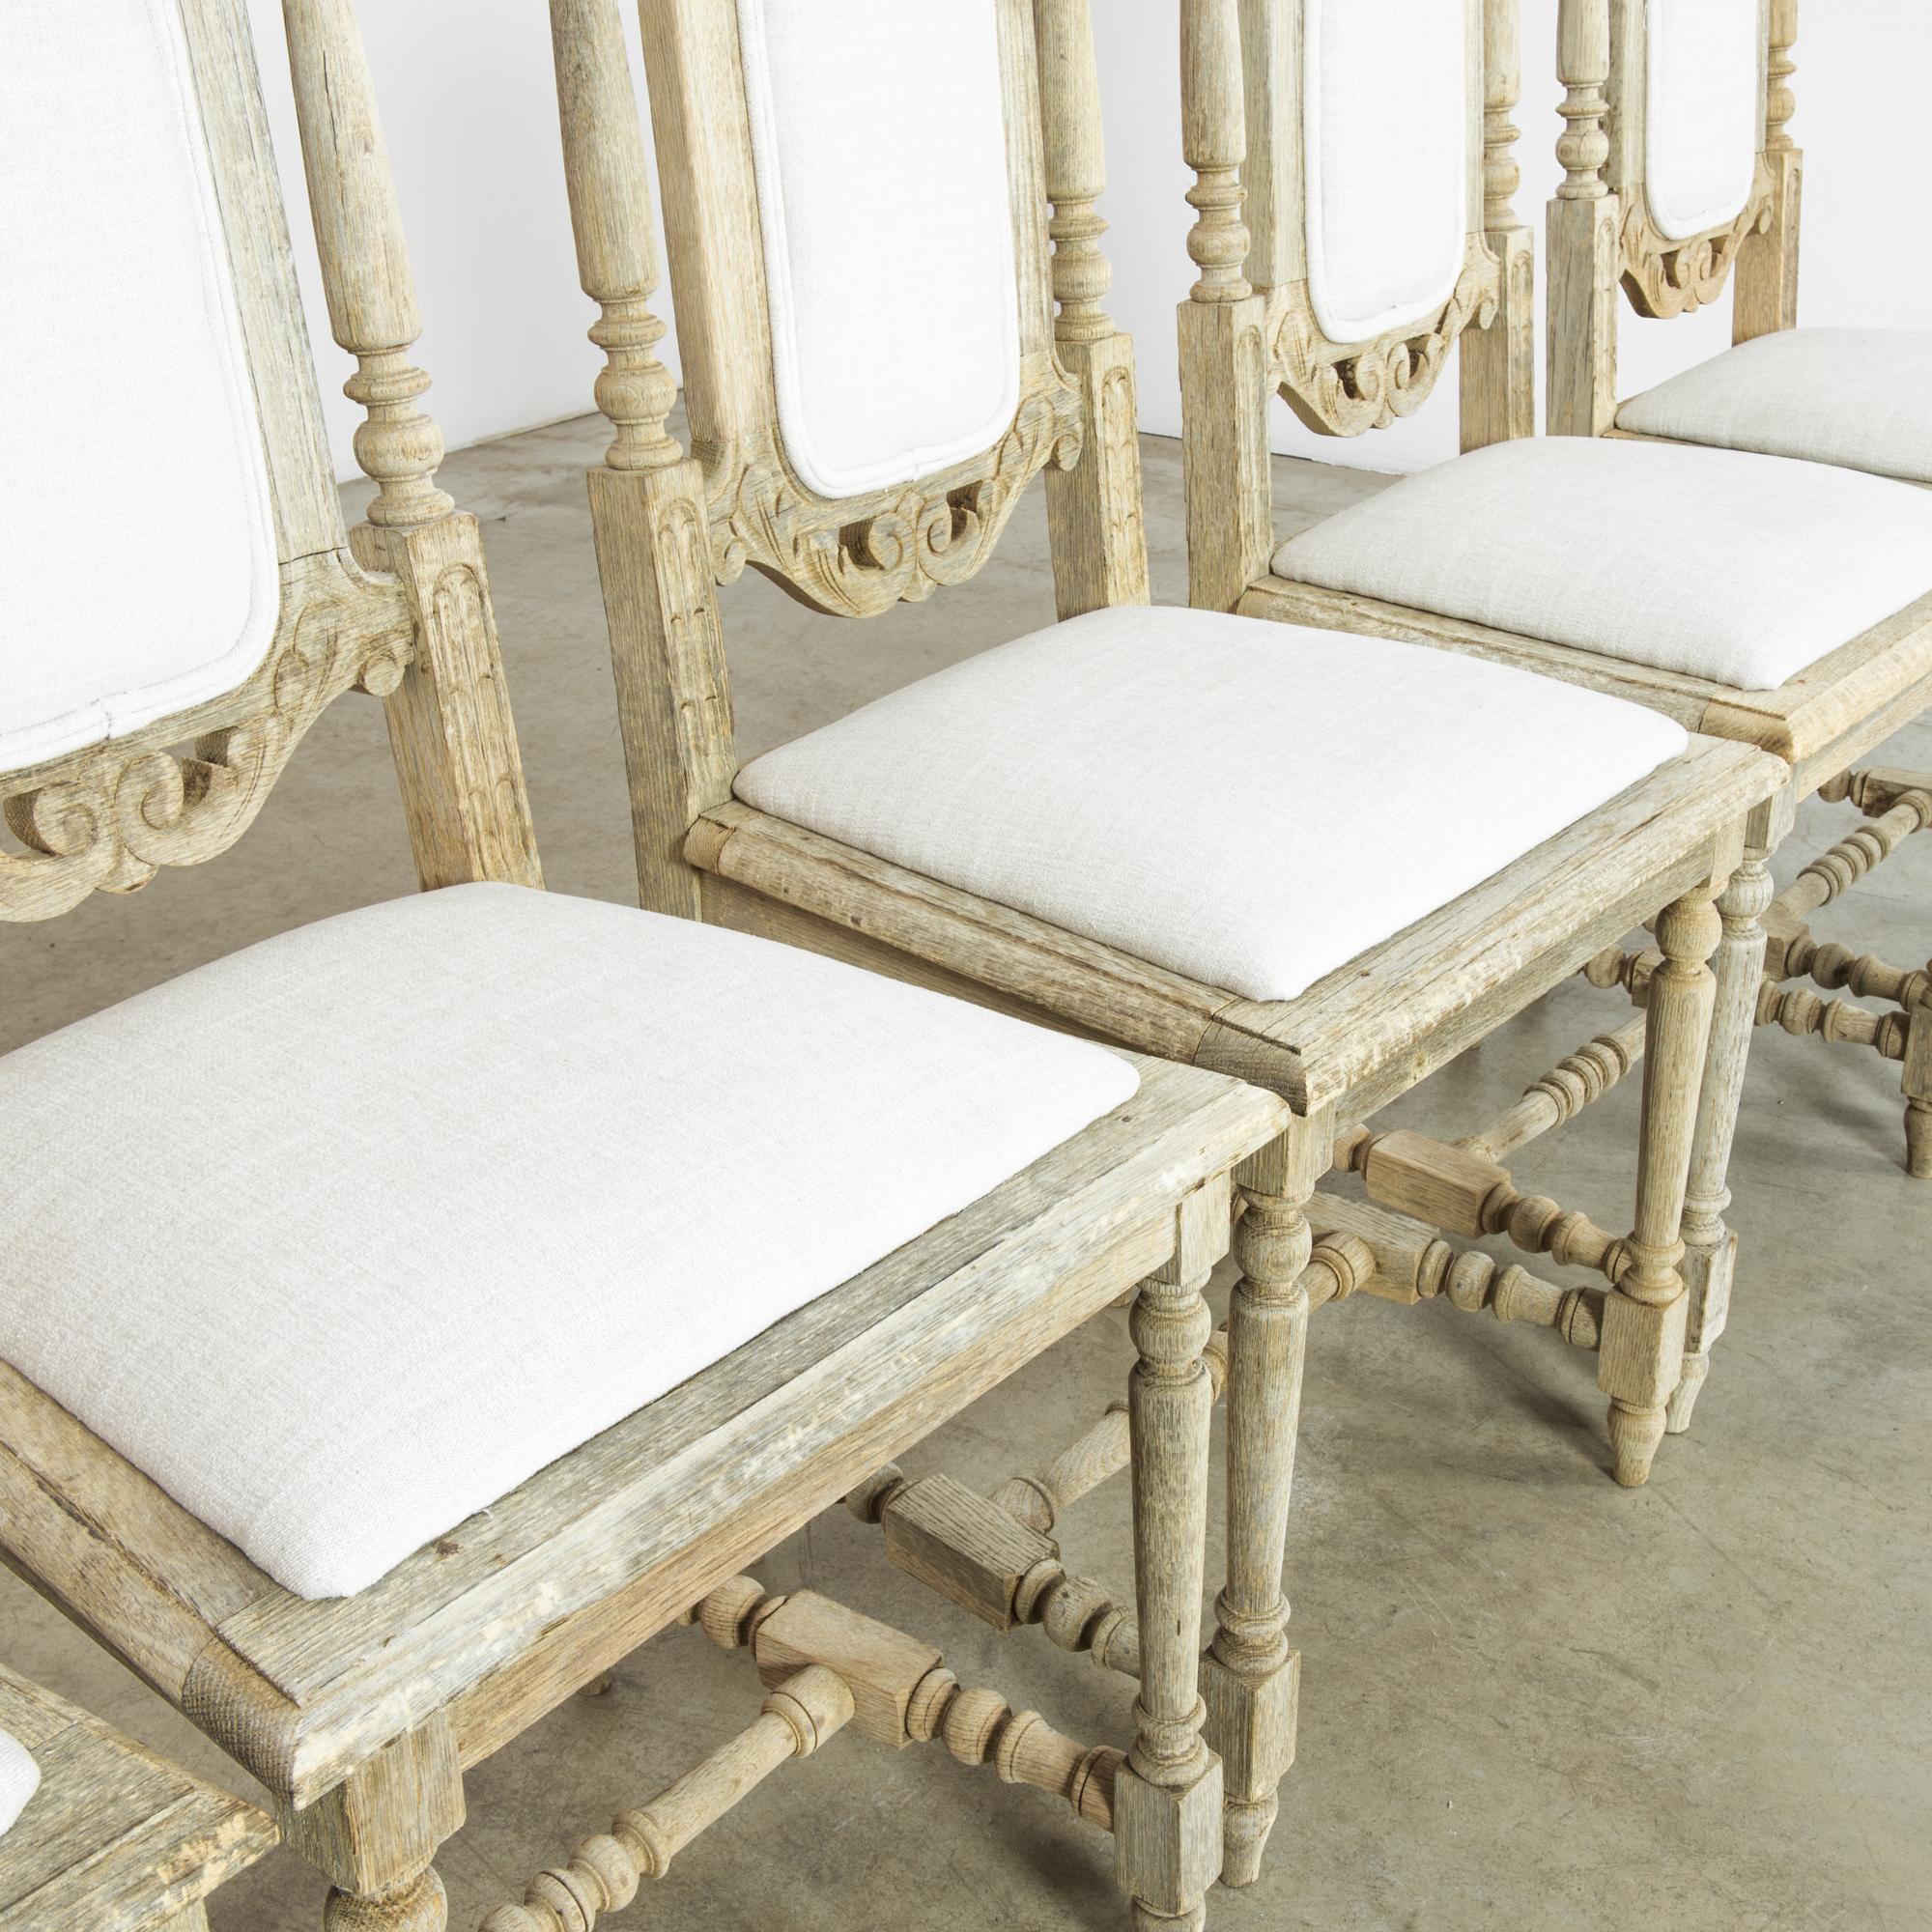 1950s Belgian Bleached Oak Chairs with Upholstered Seats and Backs, Set of Six For Sale 2